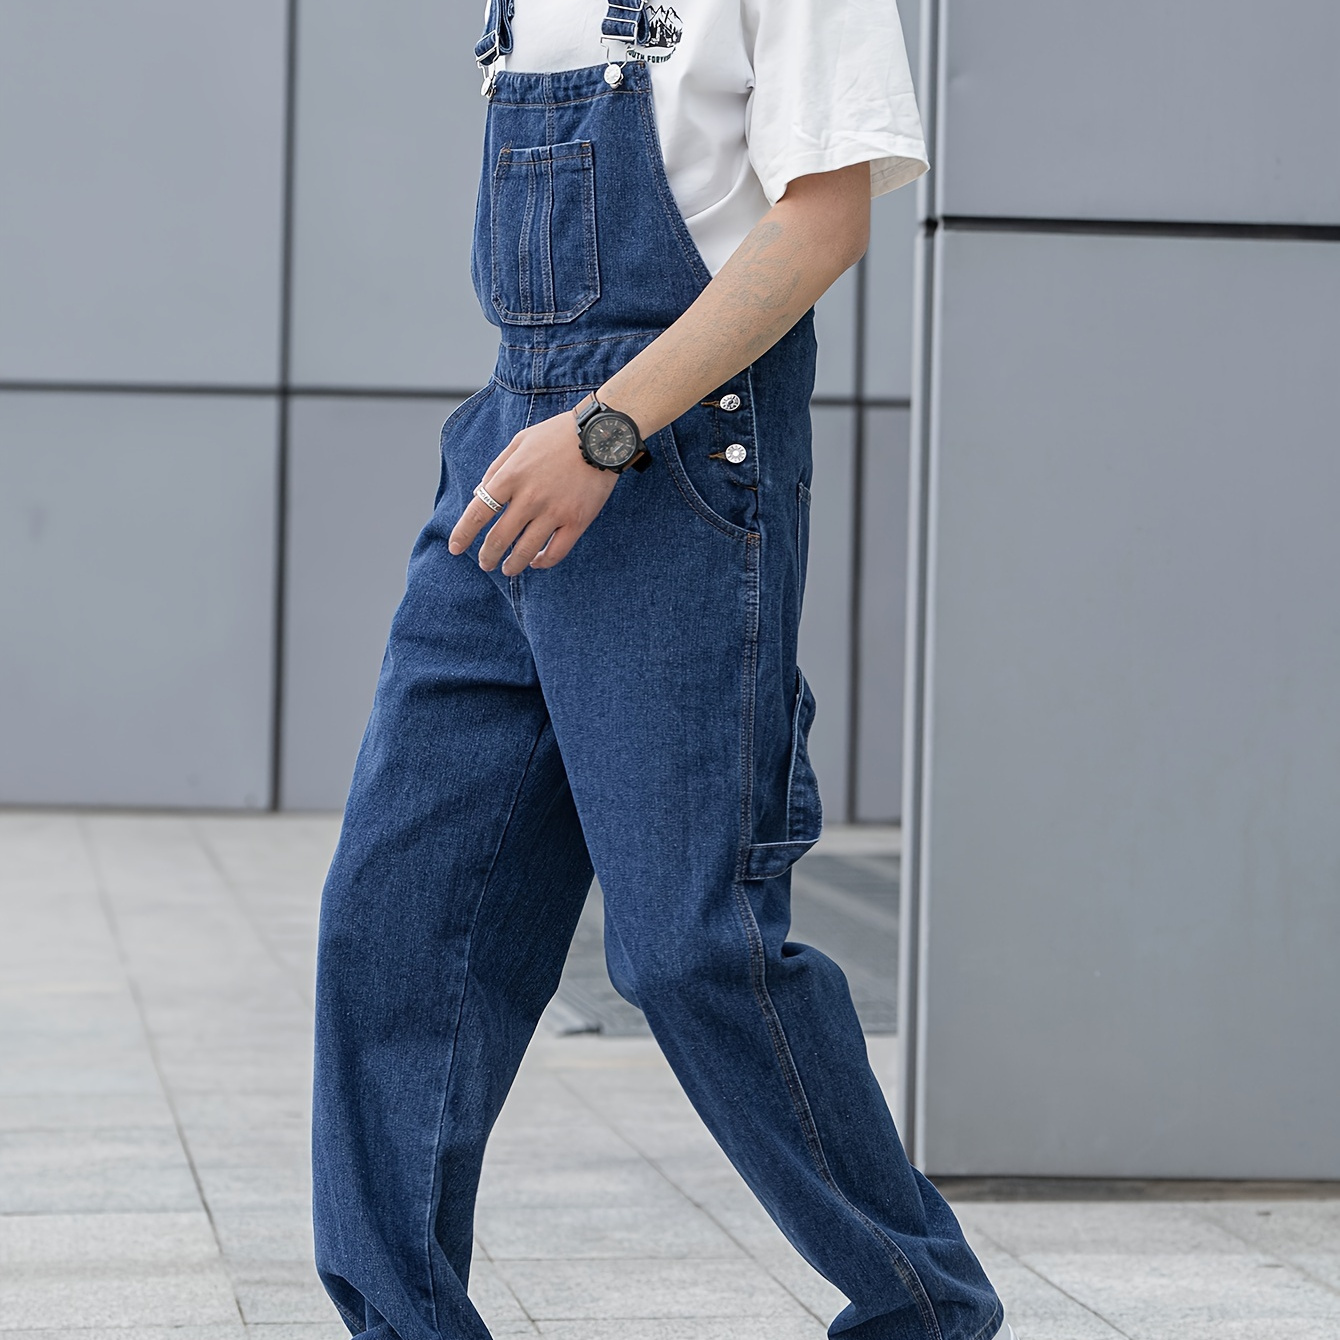 

Men's Denim Overalls, Casual Style Loose Fit Classic Adjustable Strap Multi-pocket Design Denim Trousers, Durable Jeans Pants For Streetwear & Workwear